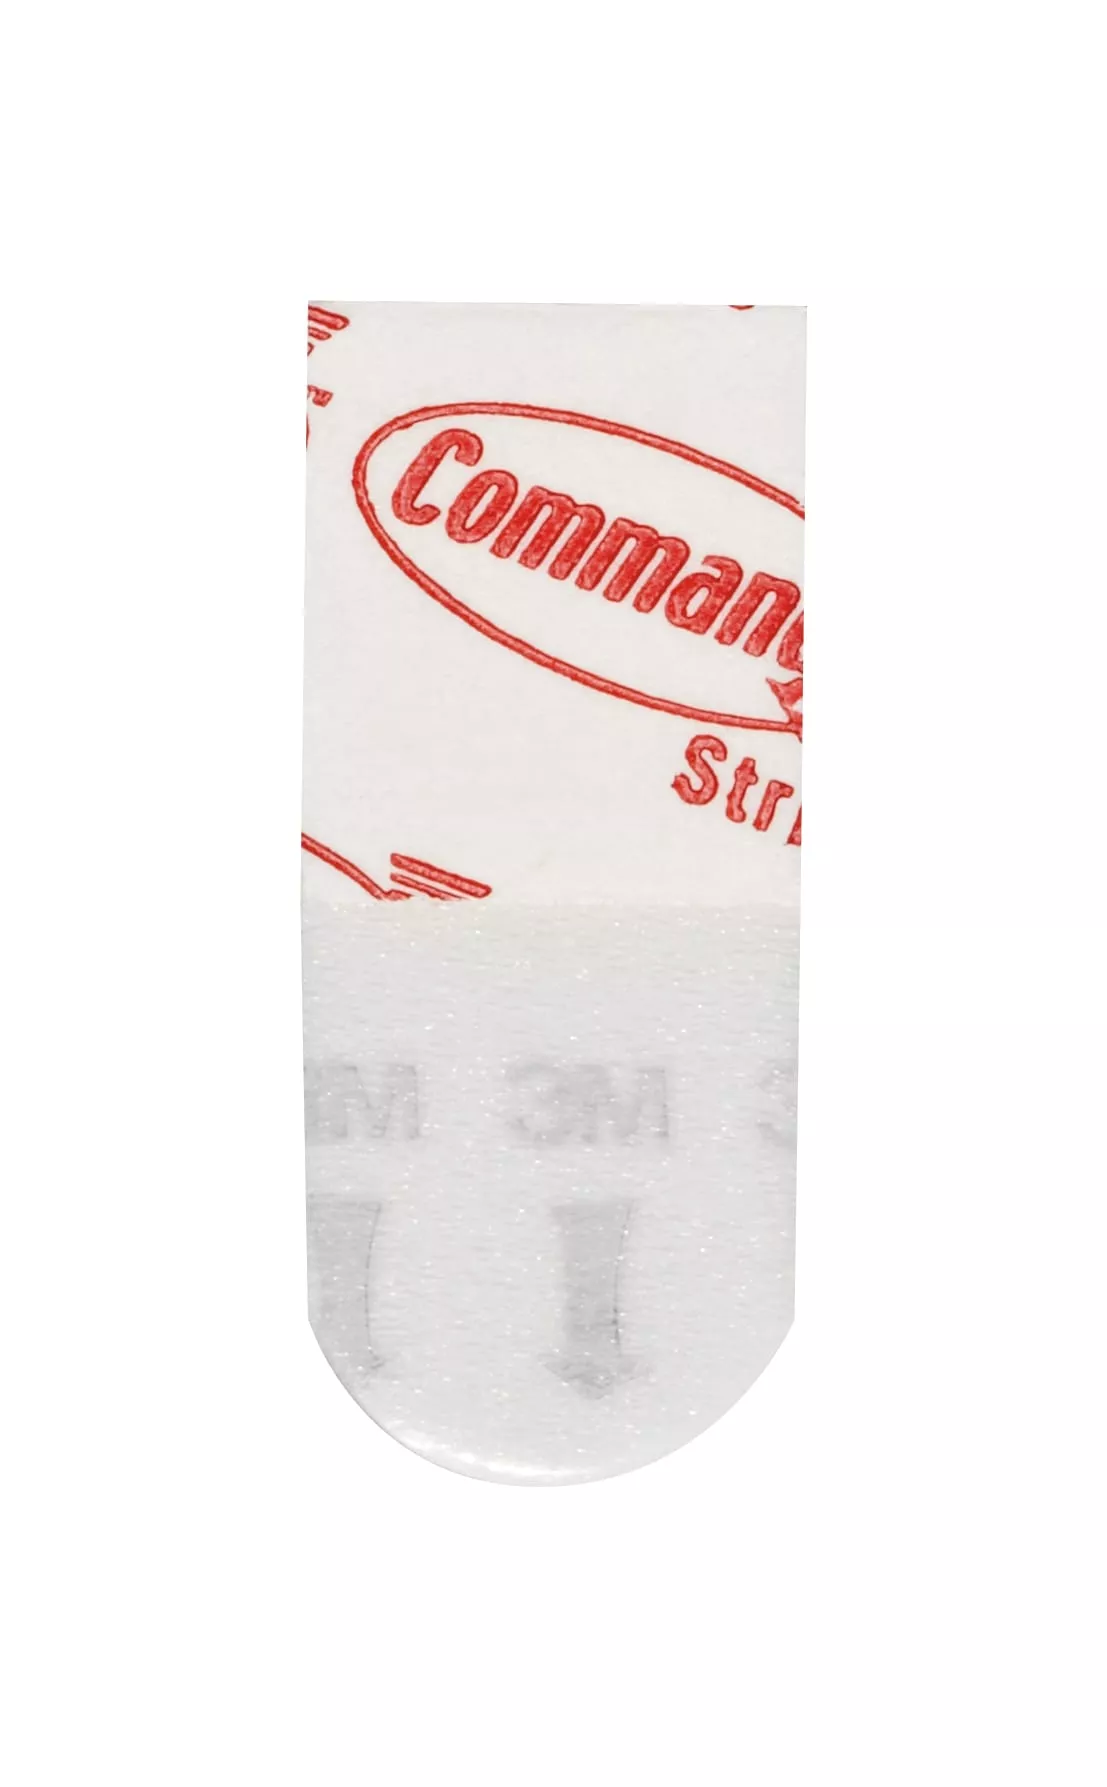 3M™ Command™ Adhesive Strips, 17523, Boxed Small Strips, 1000 Strips ,
BSD Only